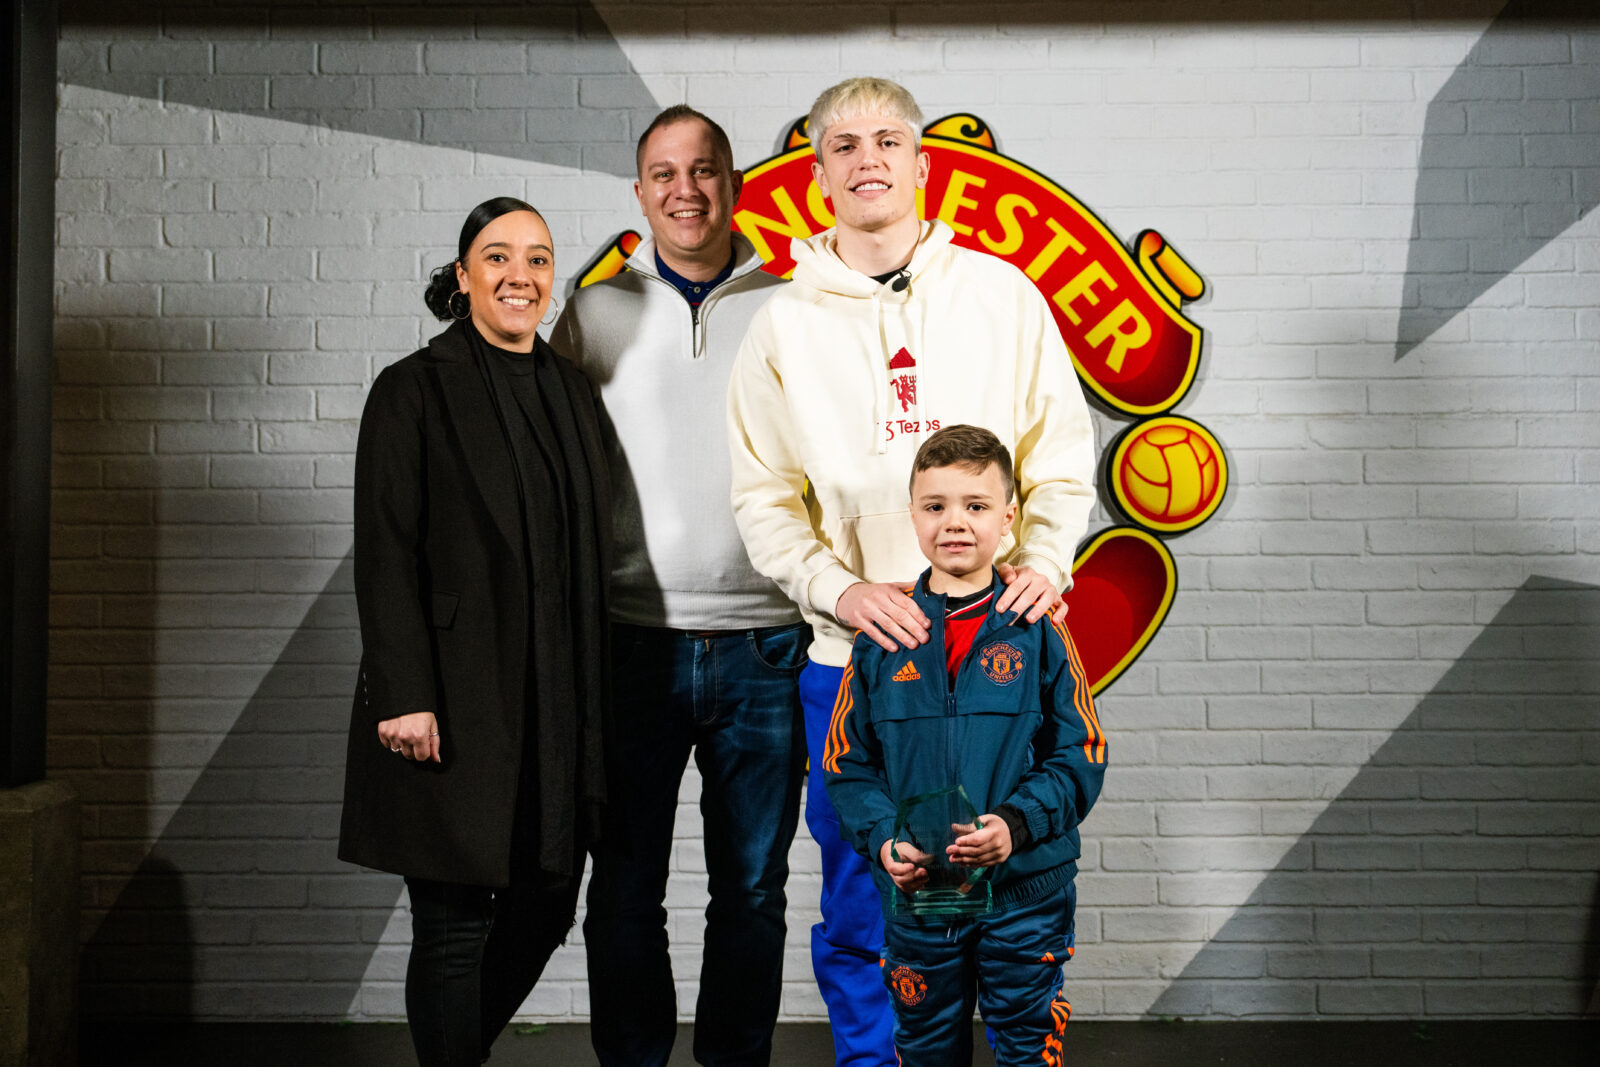 7 year old united fan wins bravery award after beating cancer